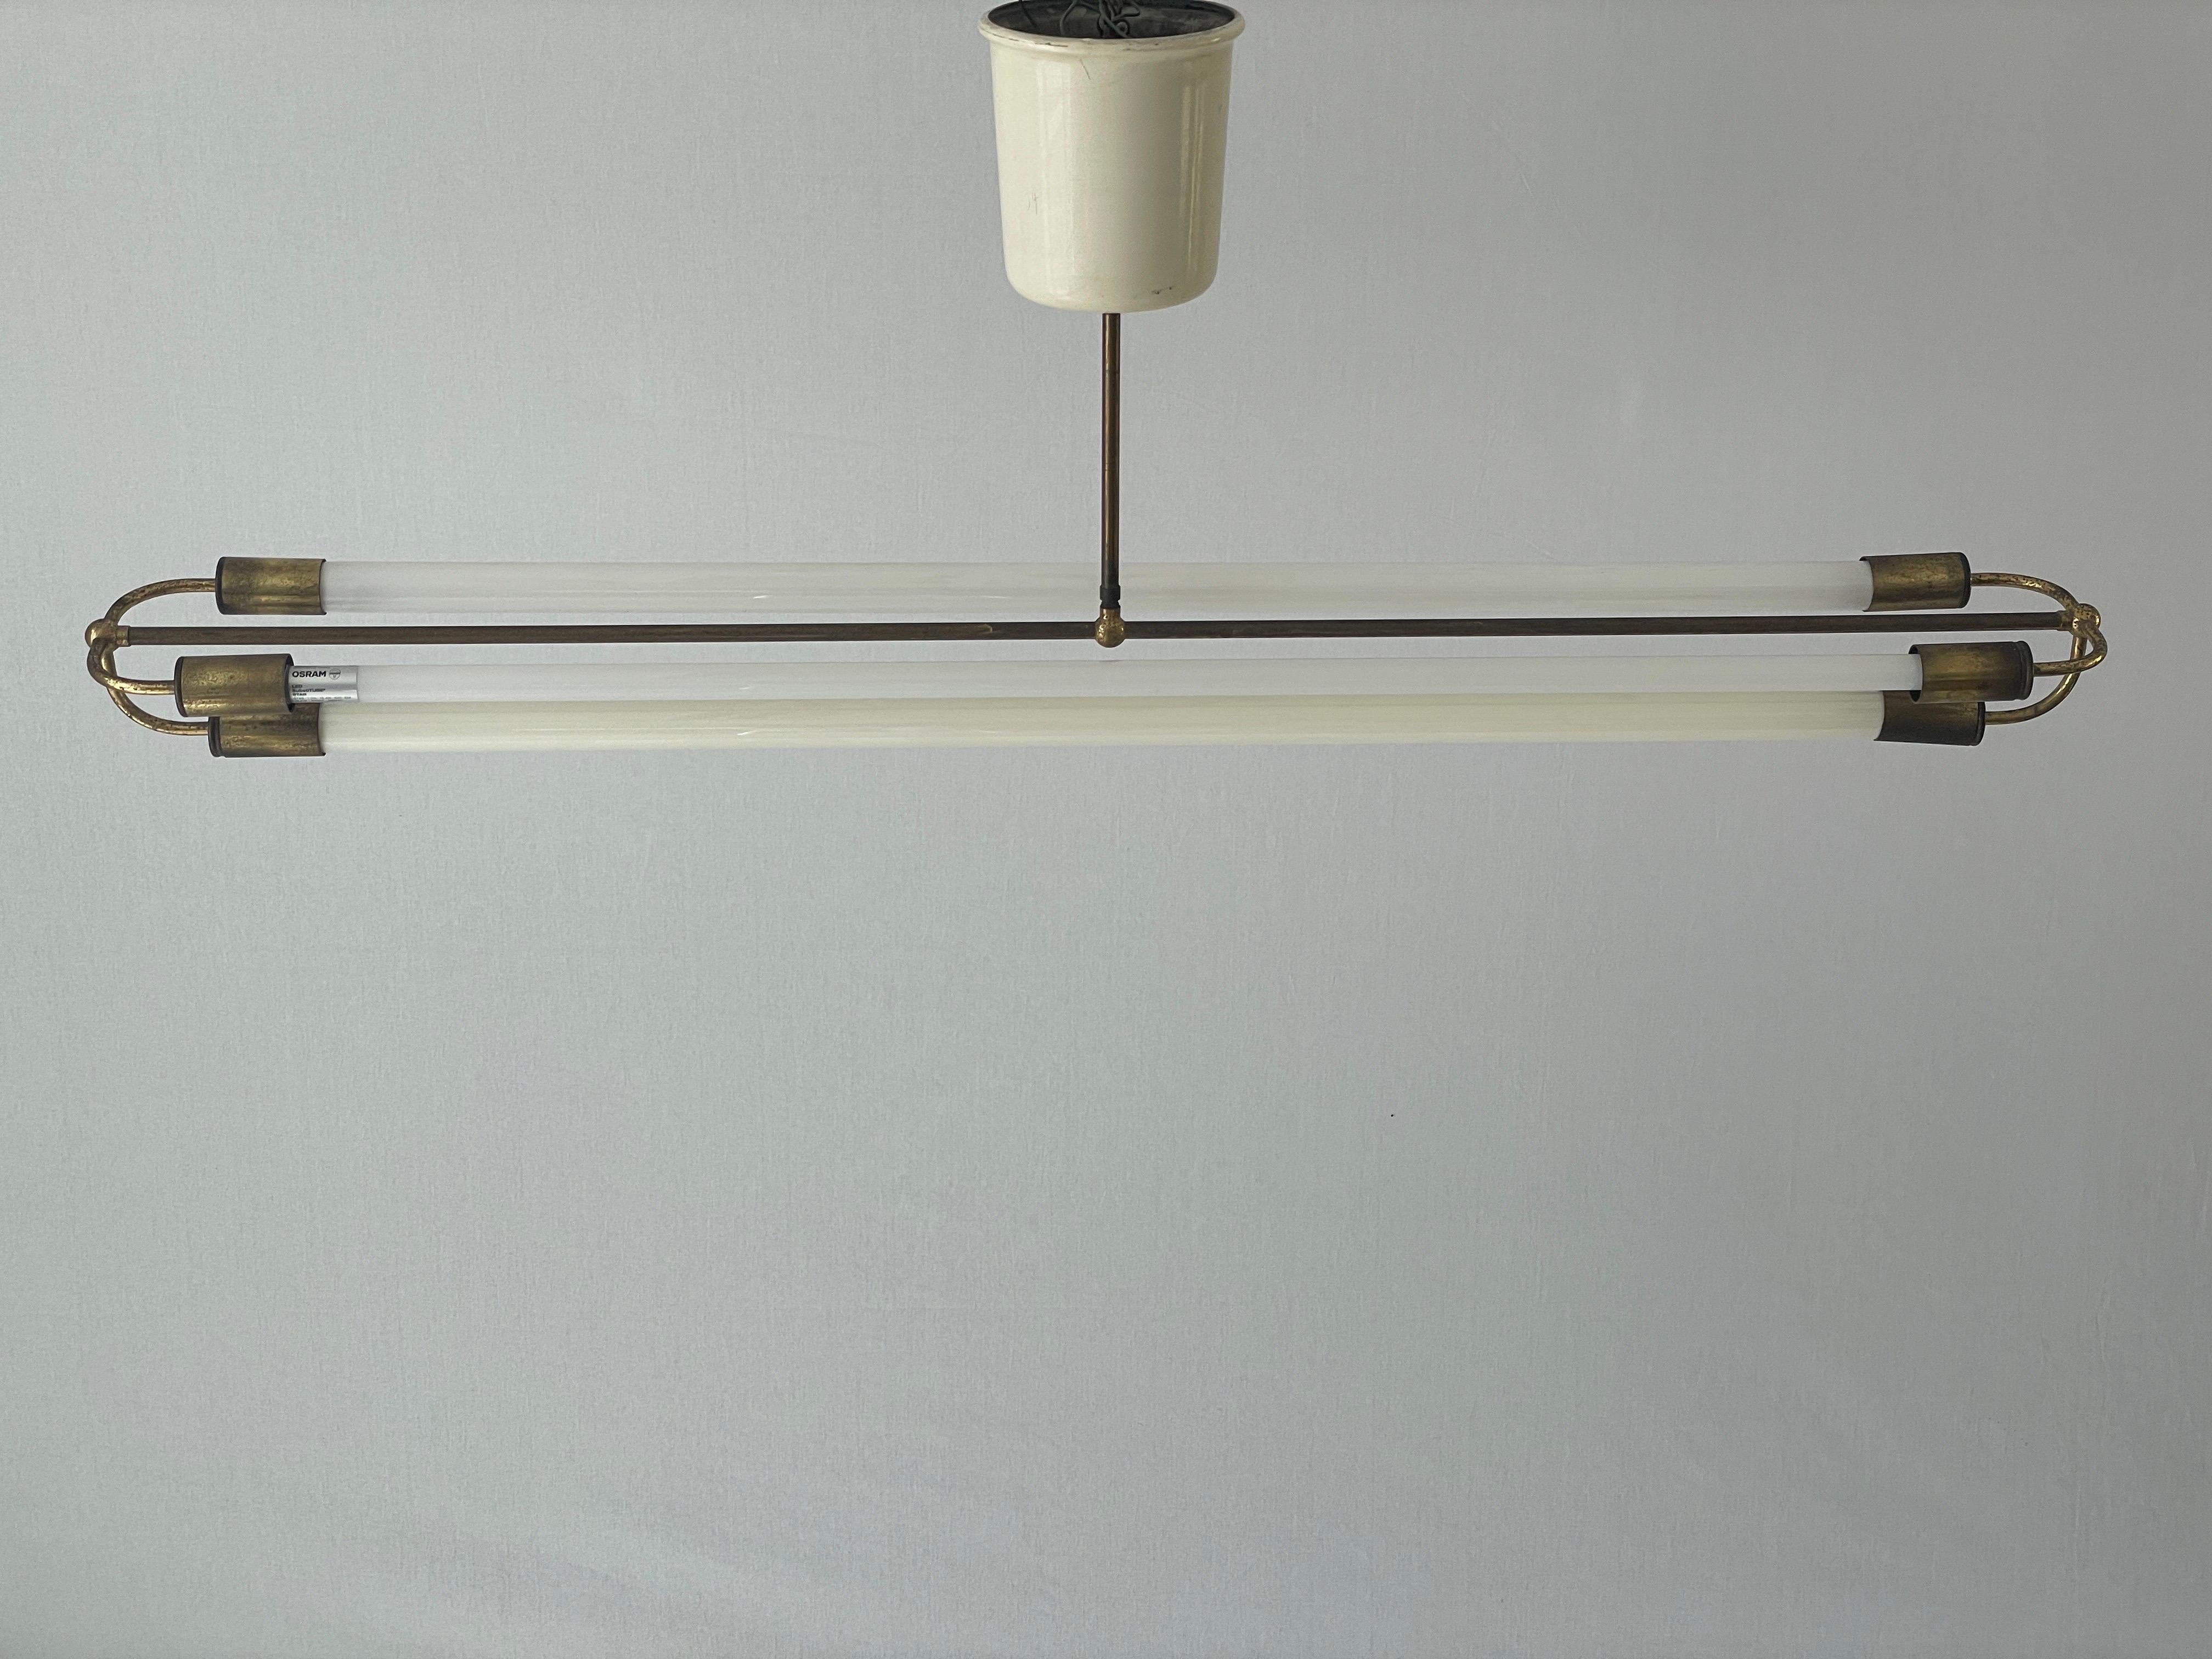 Art Deco Brass Industrial Ceiling Lamp by Kaiser & Co. with 3 fluorescent tubes, 1930s, Germany

Industrial ceiling lamp with 3 fluorescent Tubes

Note: There're 3 different type of fluorescent bulbs on the lamp

Lampshade is in very good vintage